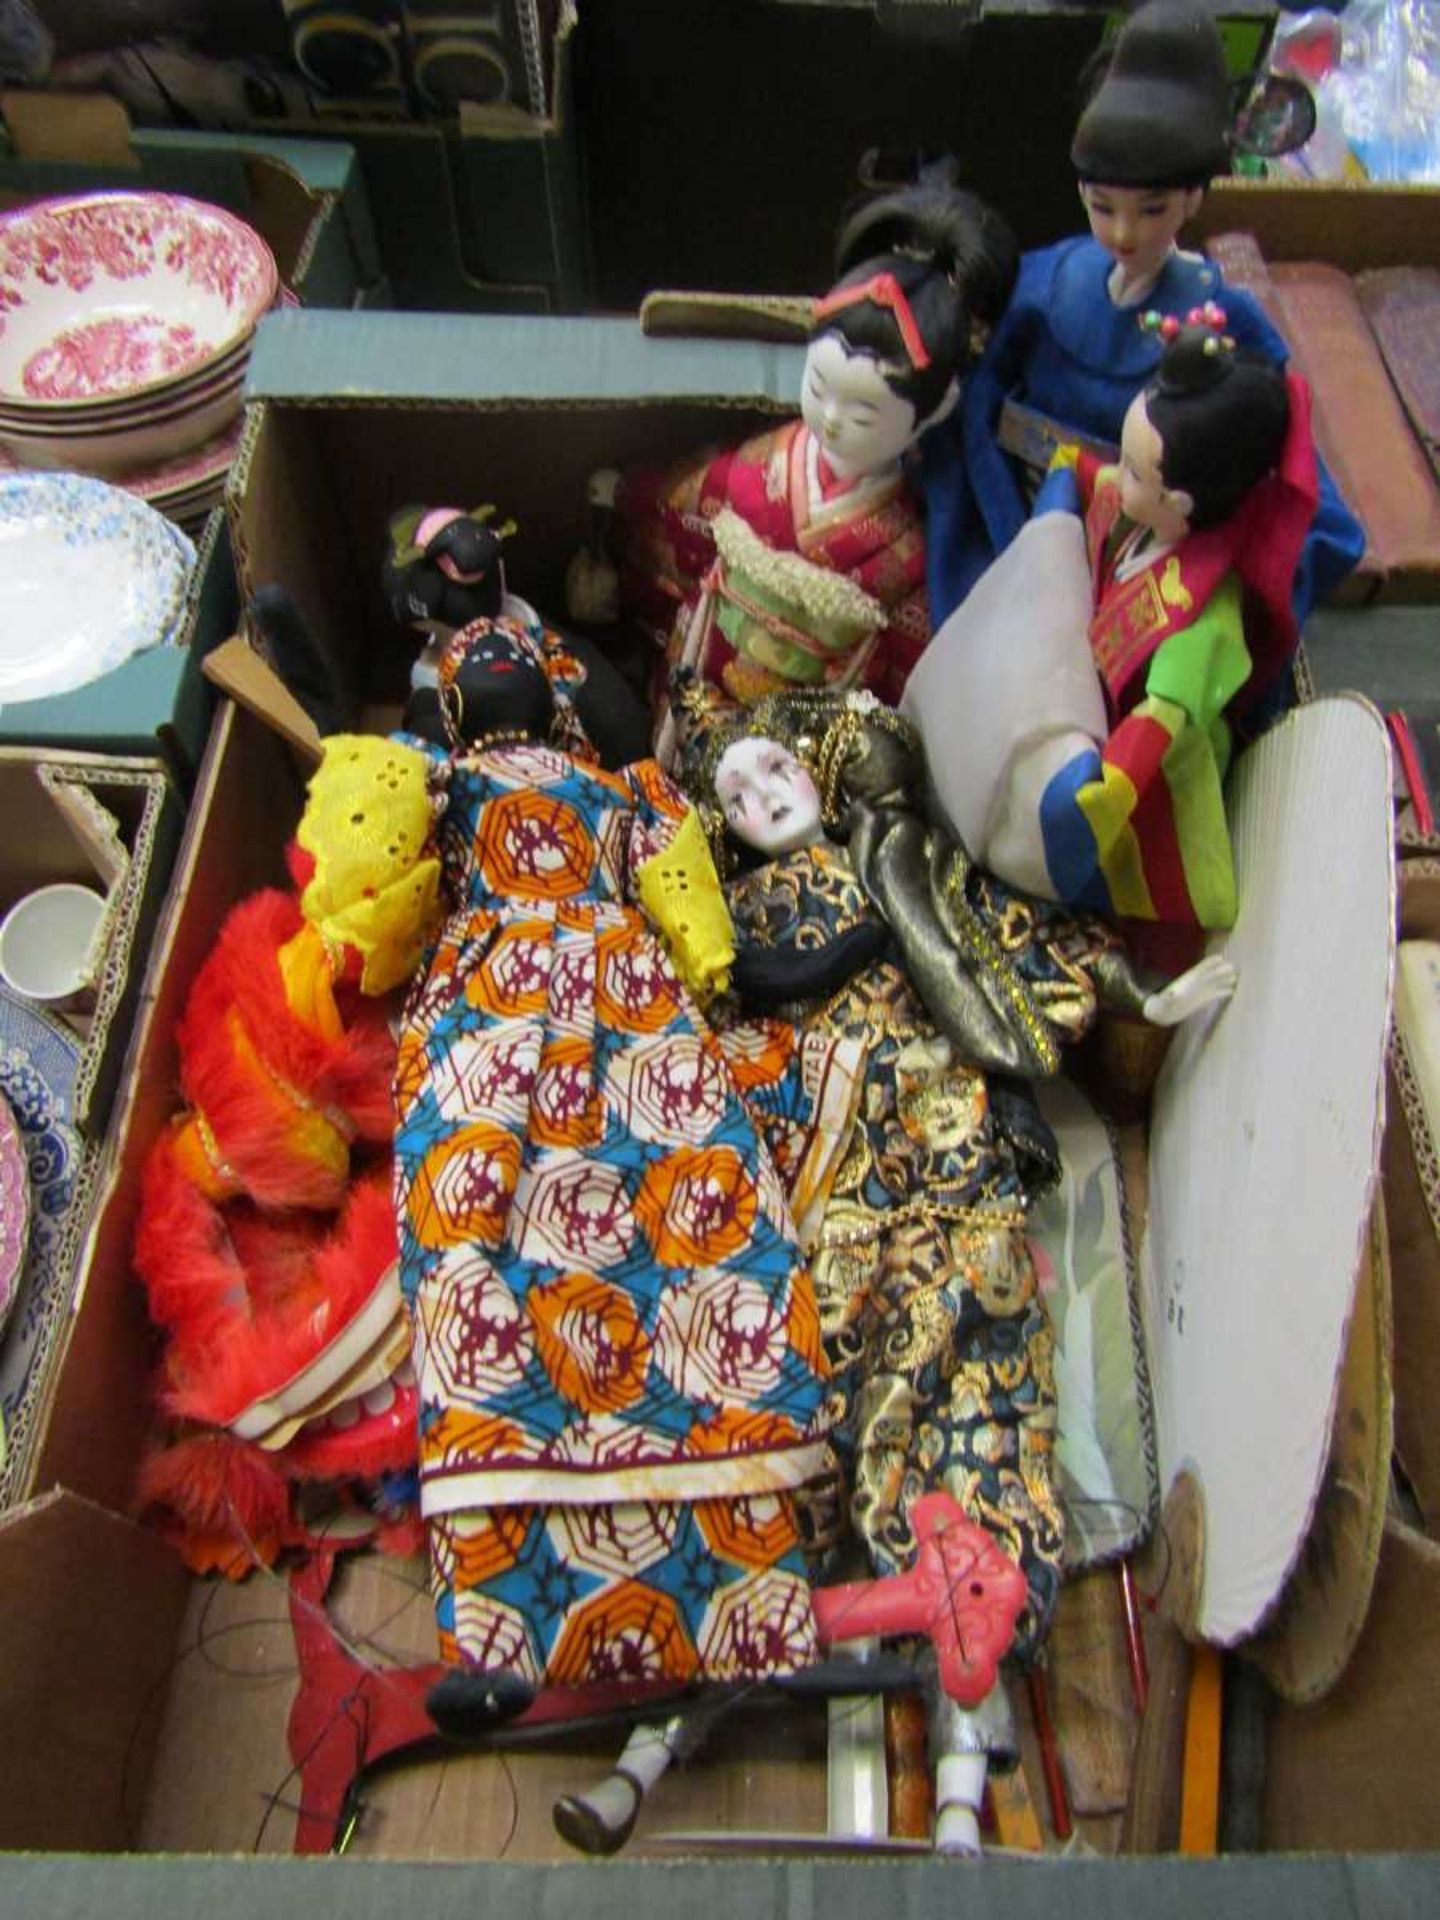 A tray of Chinese style dolls/puppets